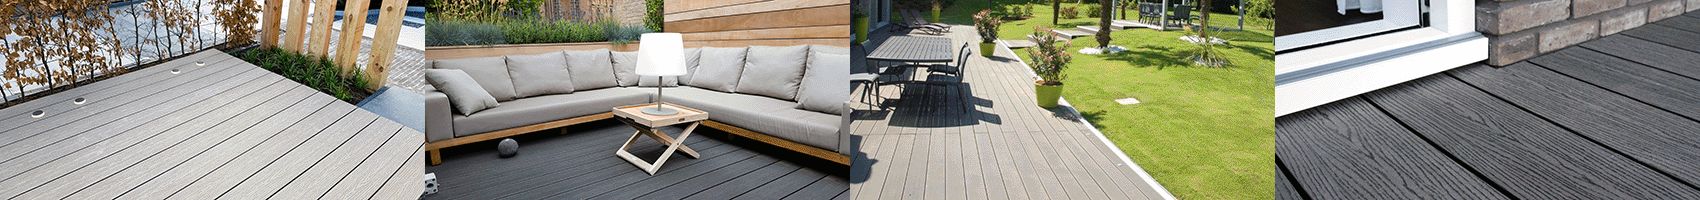 148mm Natural Double Faced WPC Decking 5m 